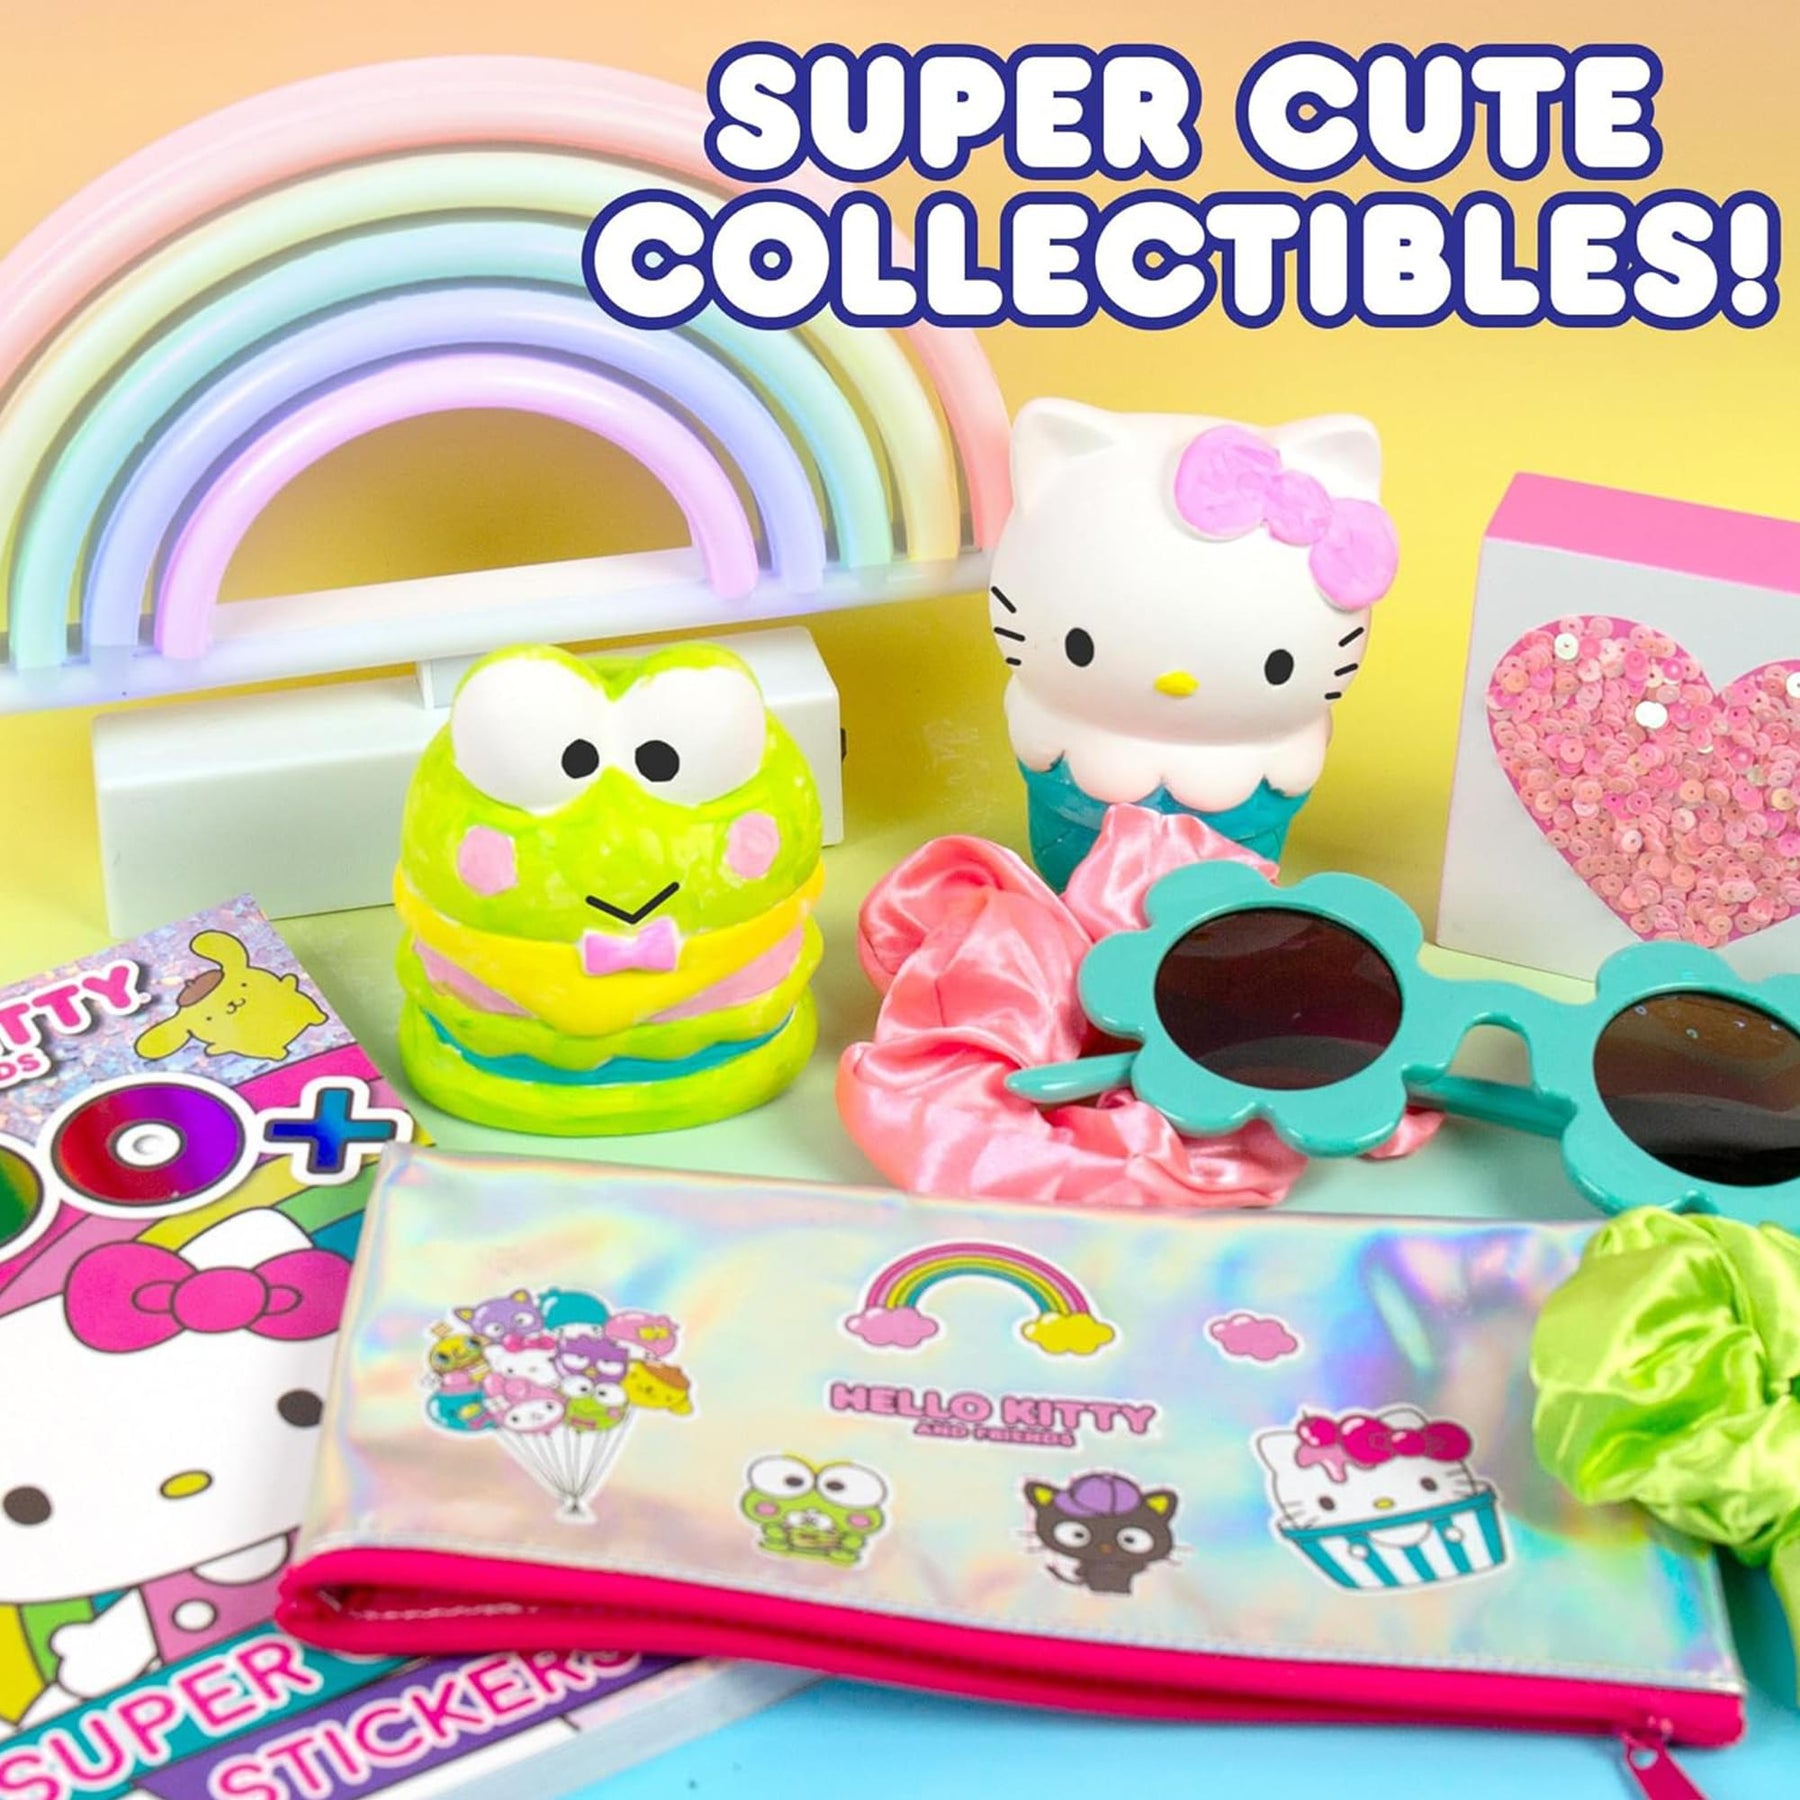 Sanrio Hello Kitty and Friends Paint Your Own Figurines Kit